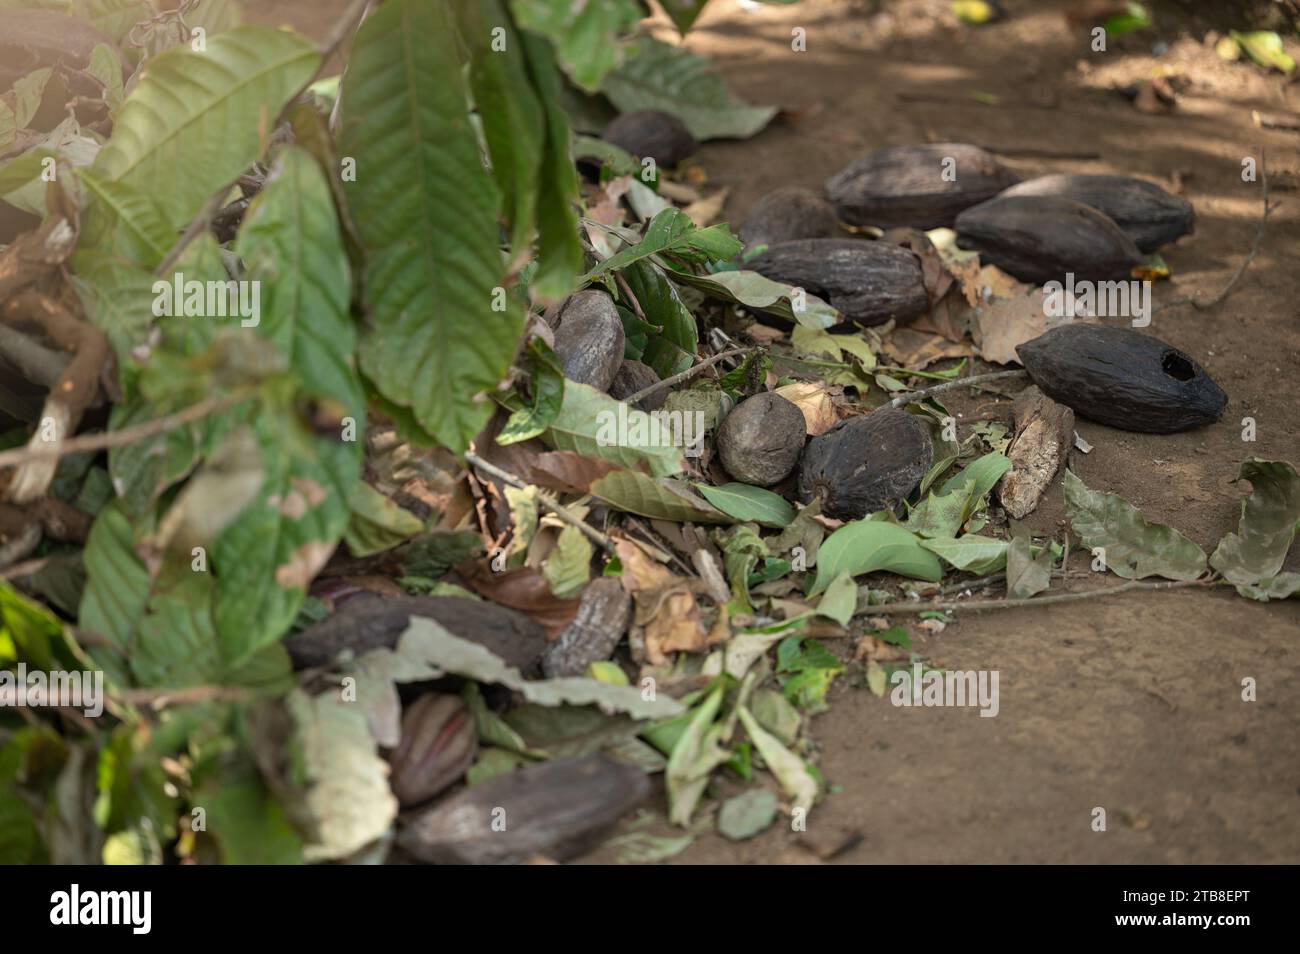 Cut of cacao tree plant on ground with bad spots Stock Photo